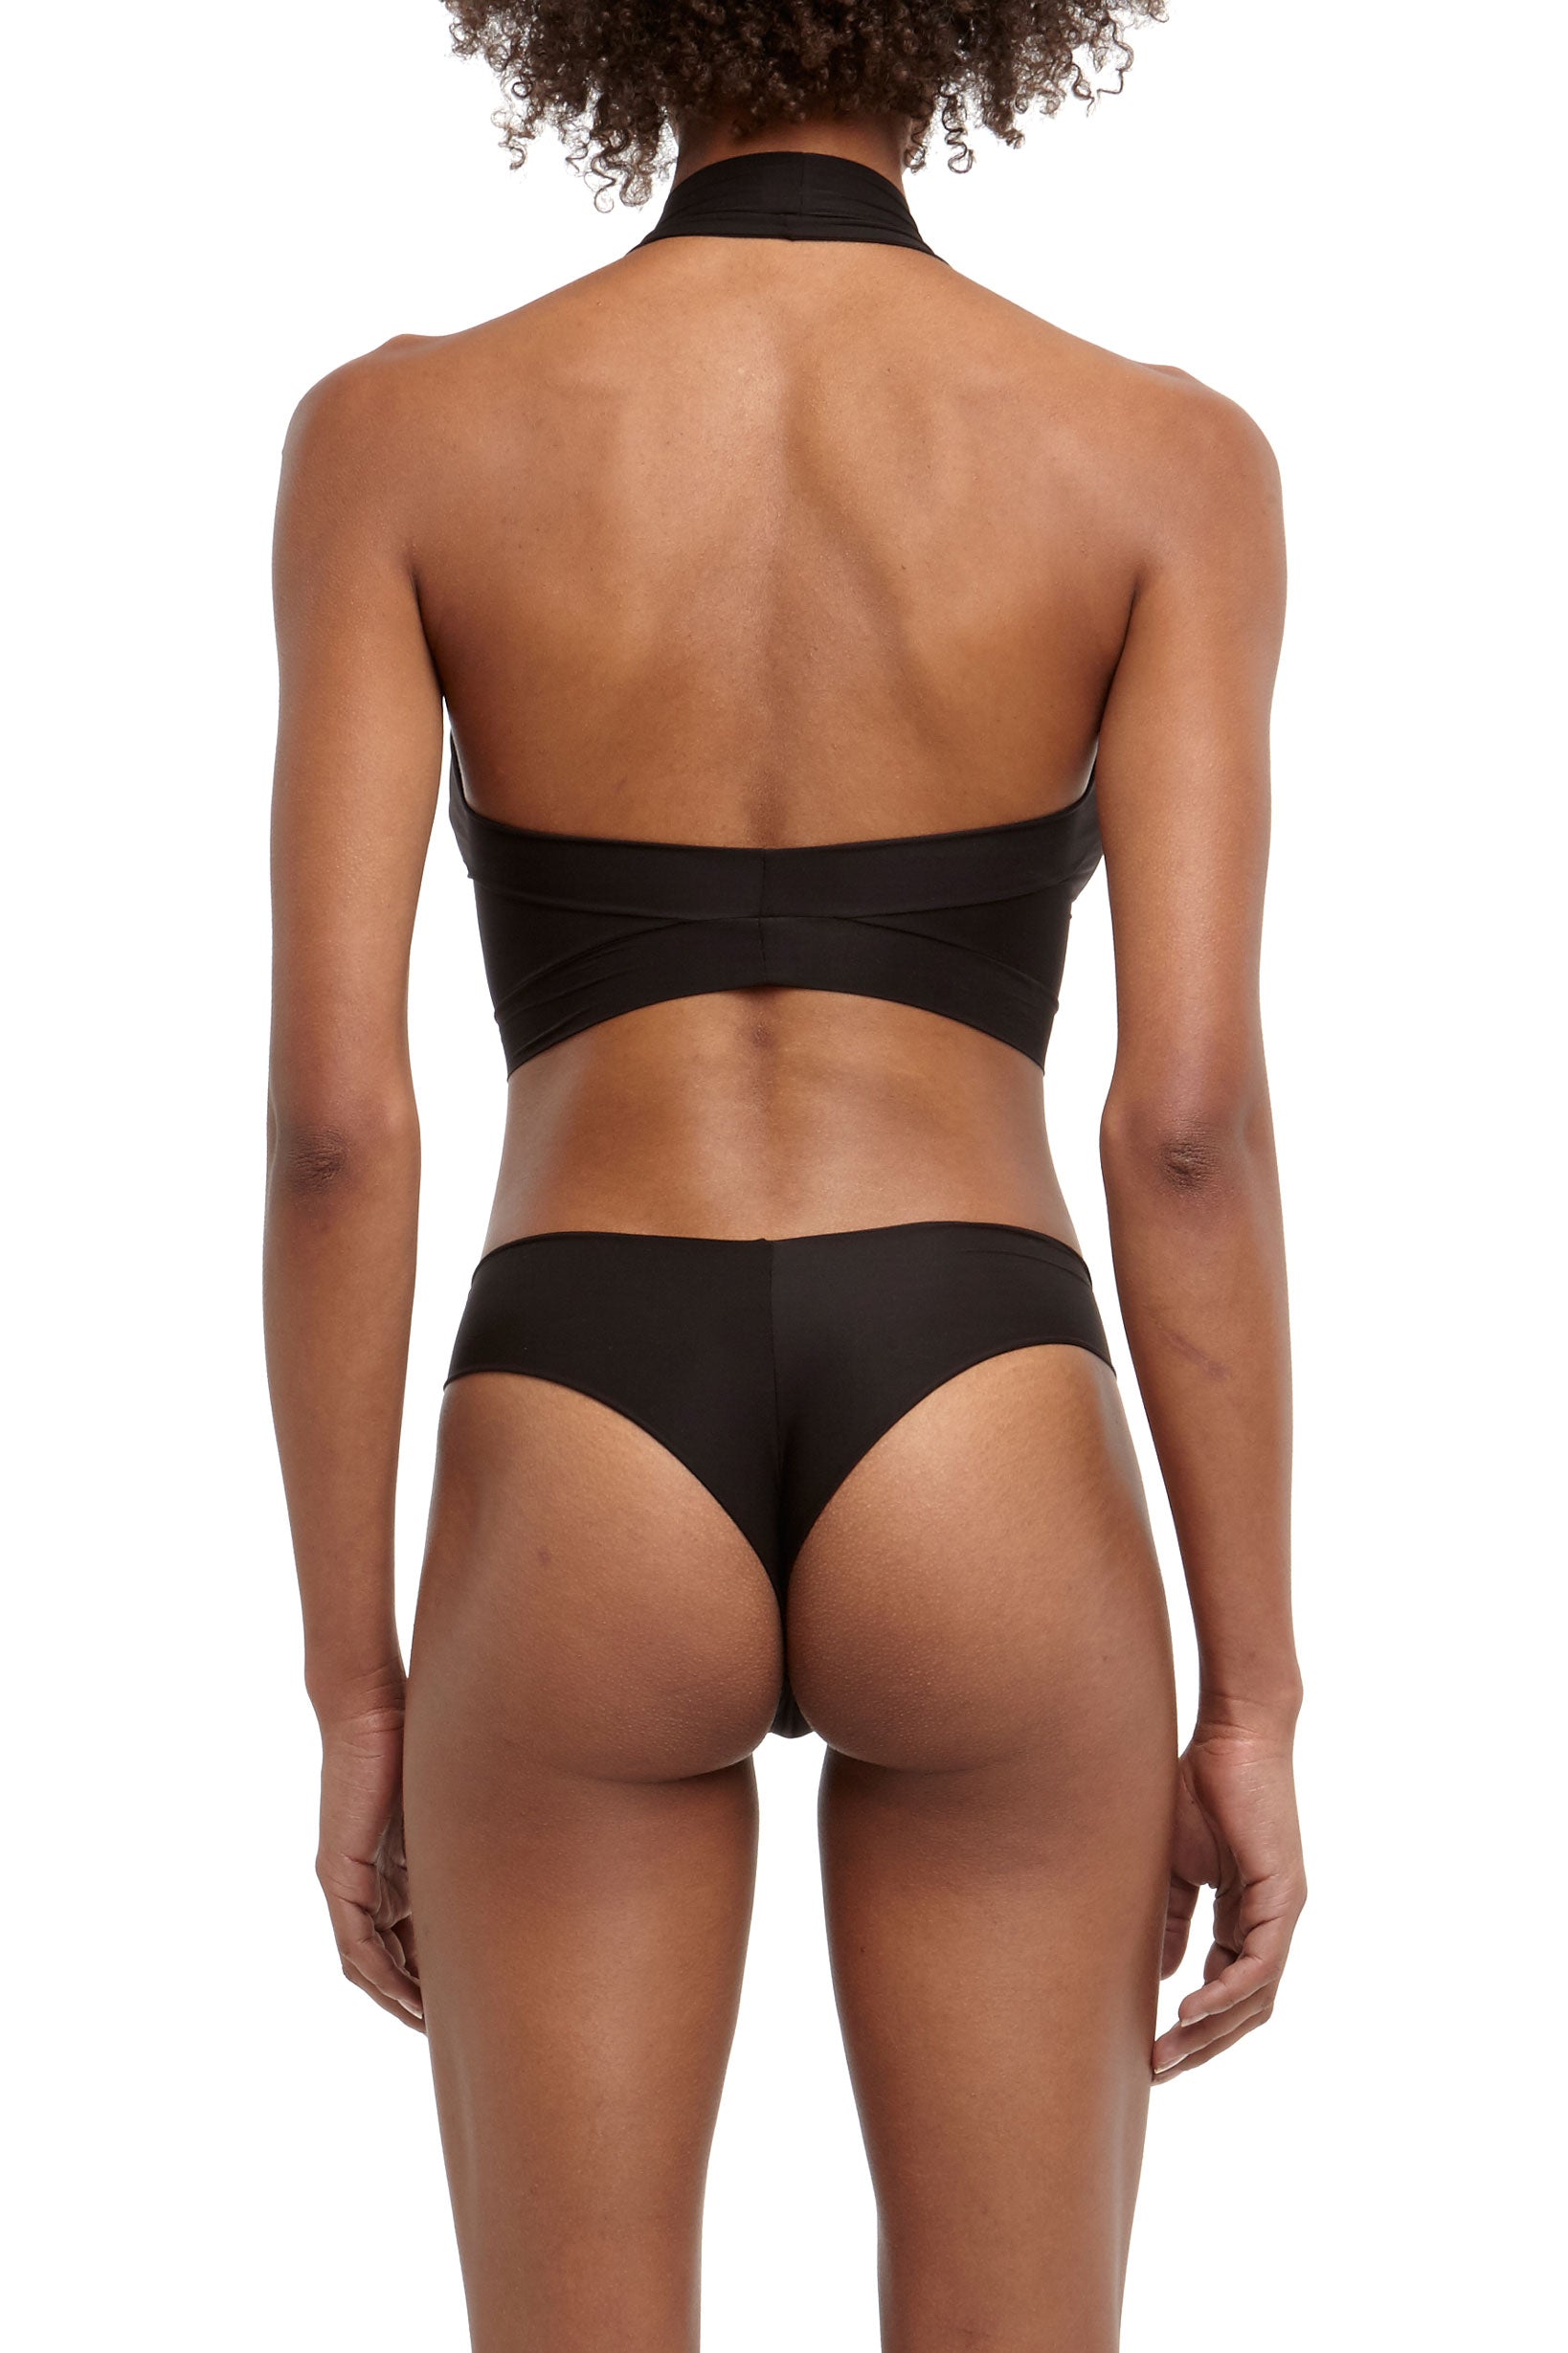 DSTM Brazilian thong and Axon halter top - back